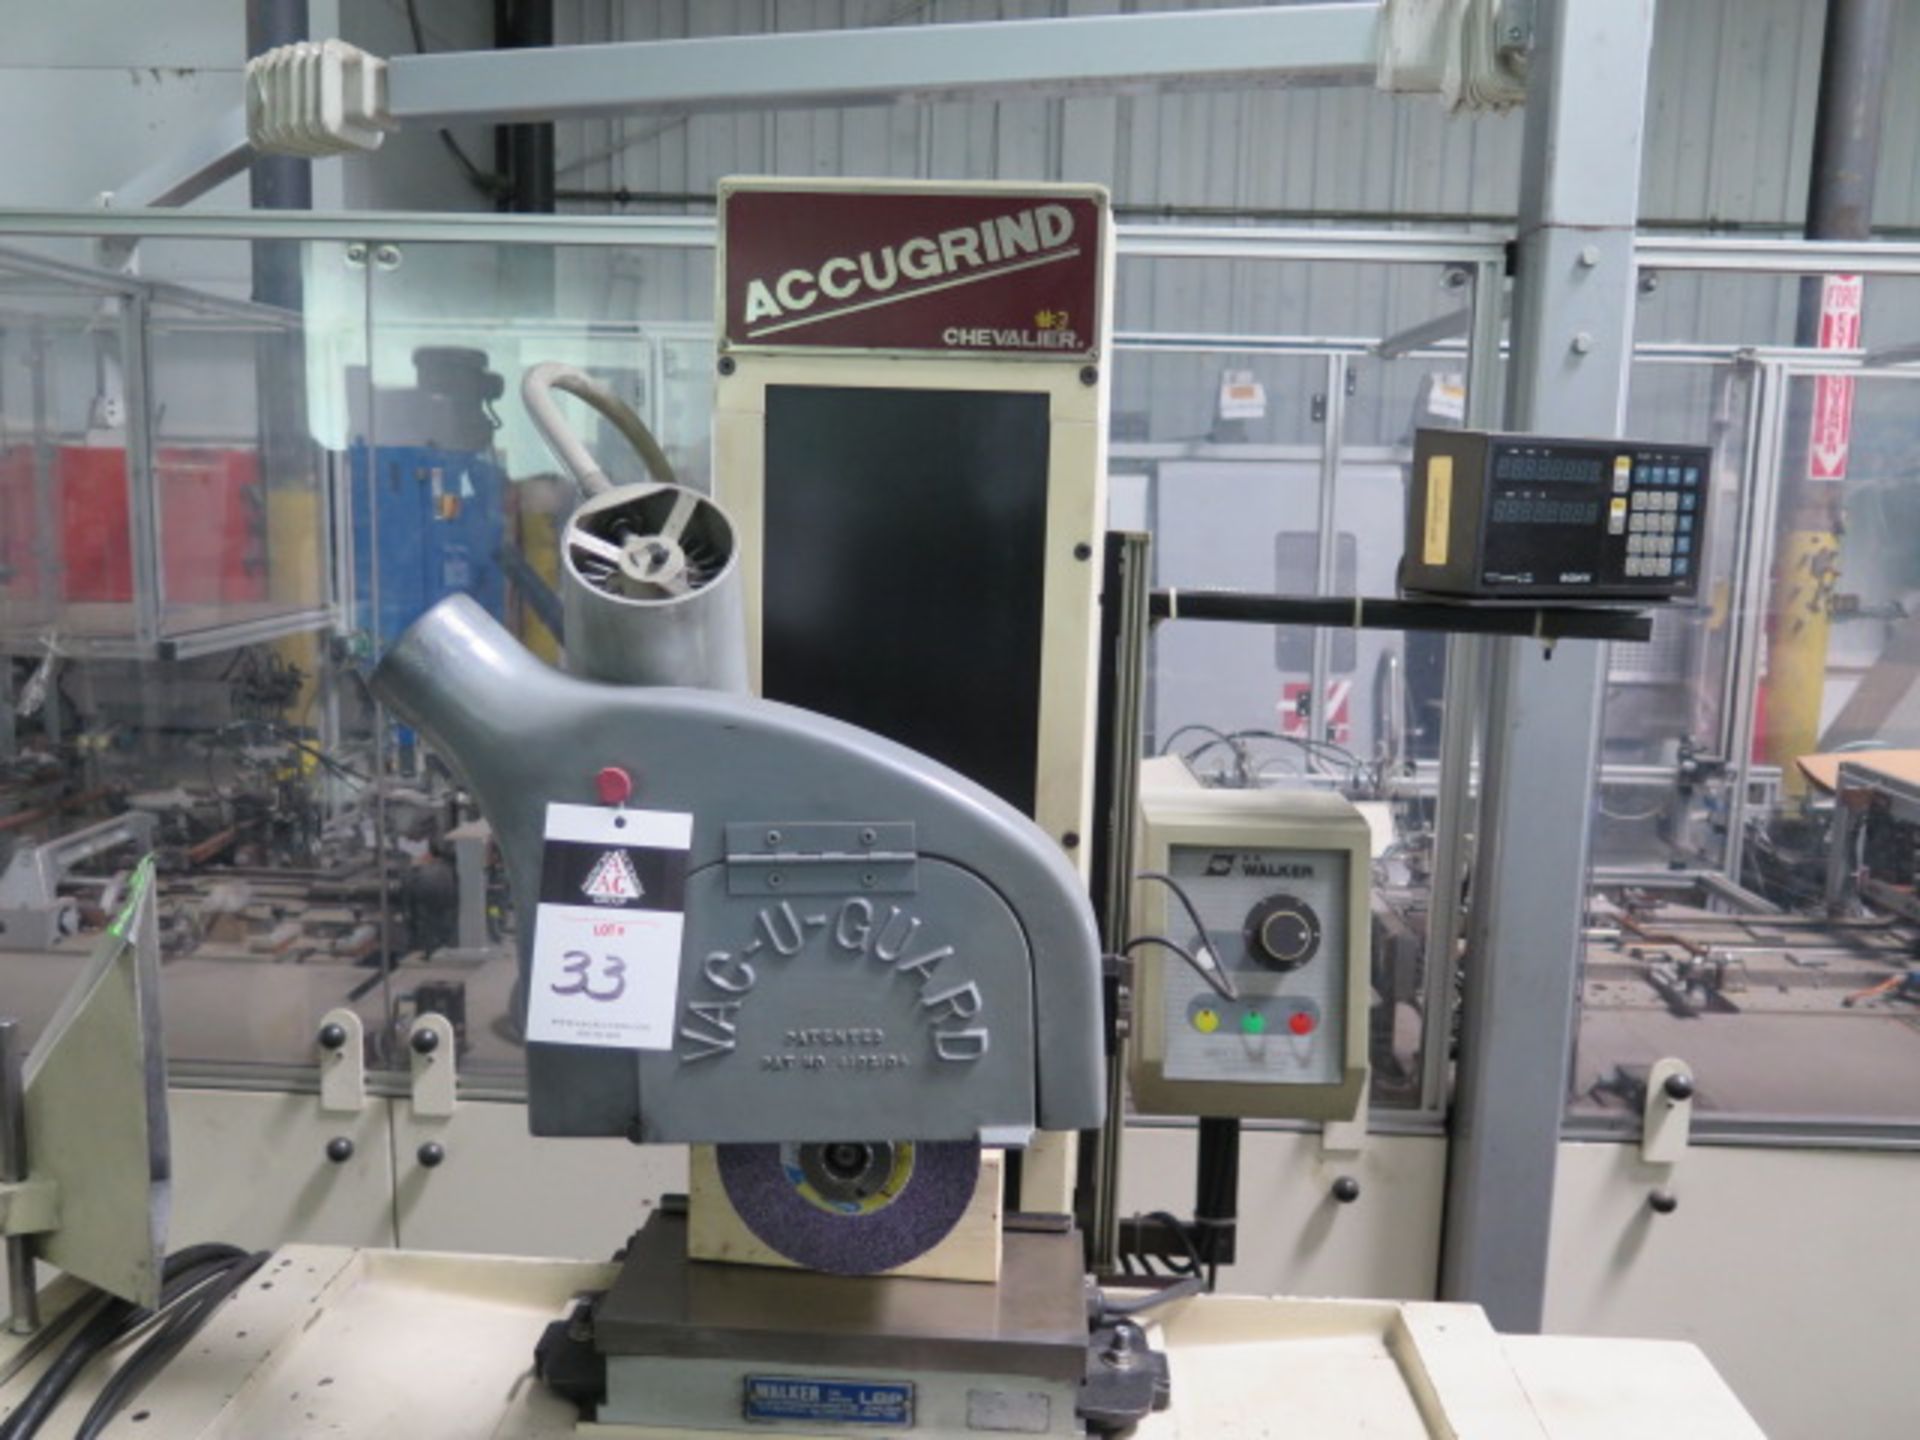 Chevalier Accugrind 6” x 12” Surface Grinder s/n A5865006 w/ Sony DRO, 0.00005 Increment, SOLD AS IS - Image 4 of 15